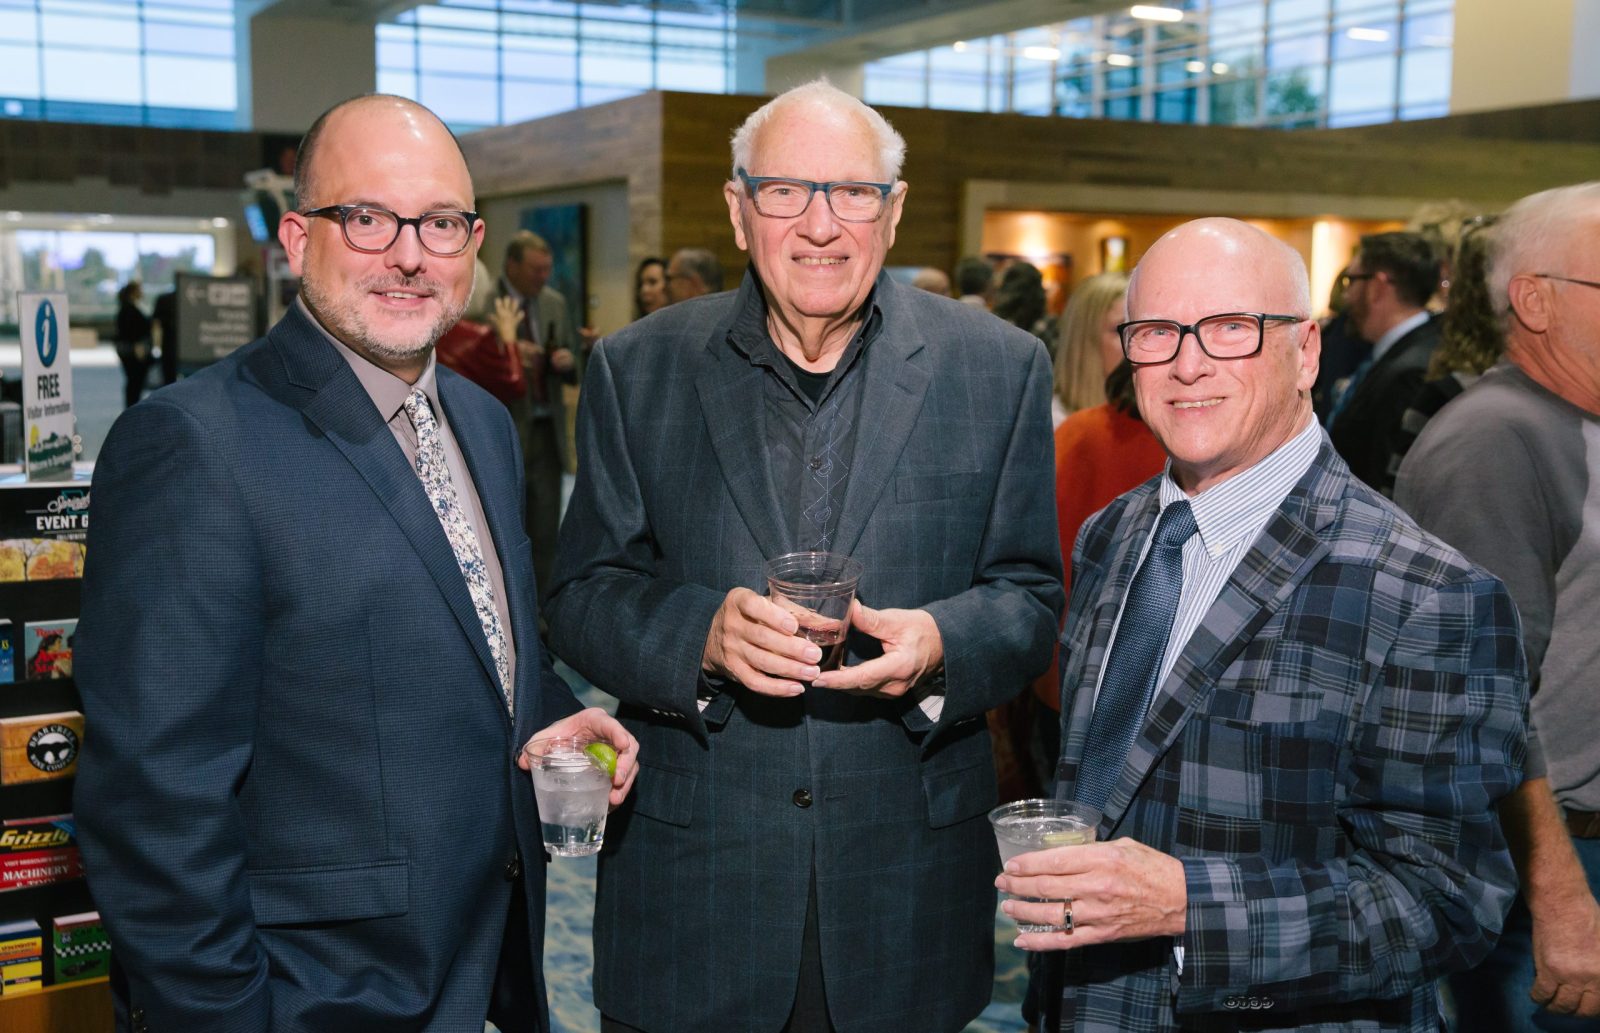 Robert Bradley, middle, poses for a photo with Rick Dines and Bradley's partner Lou Schaeffer at the 2019 Ozzies.